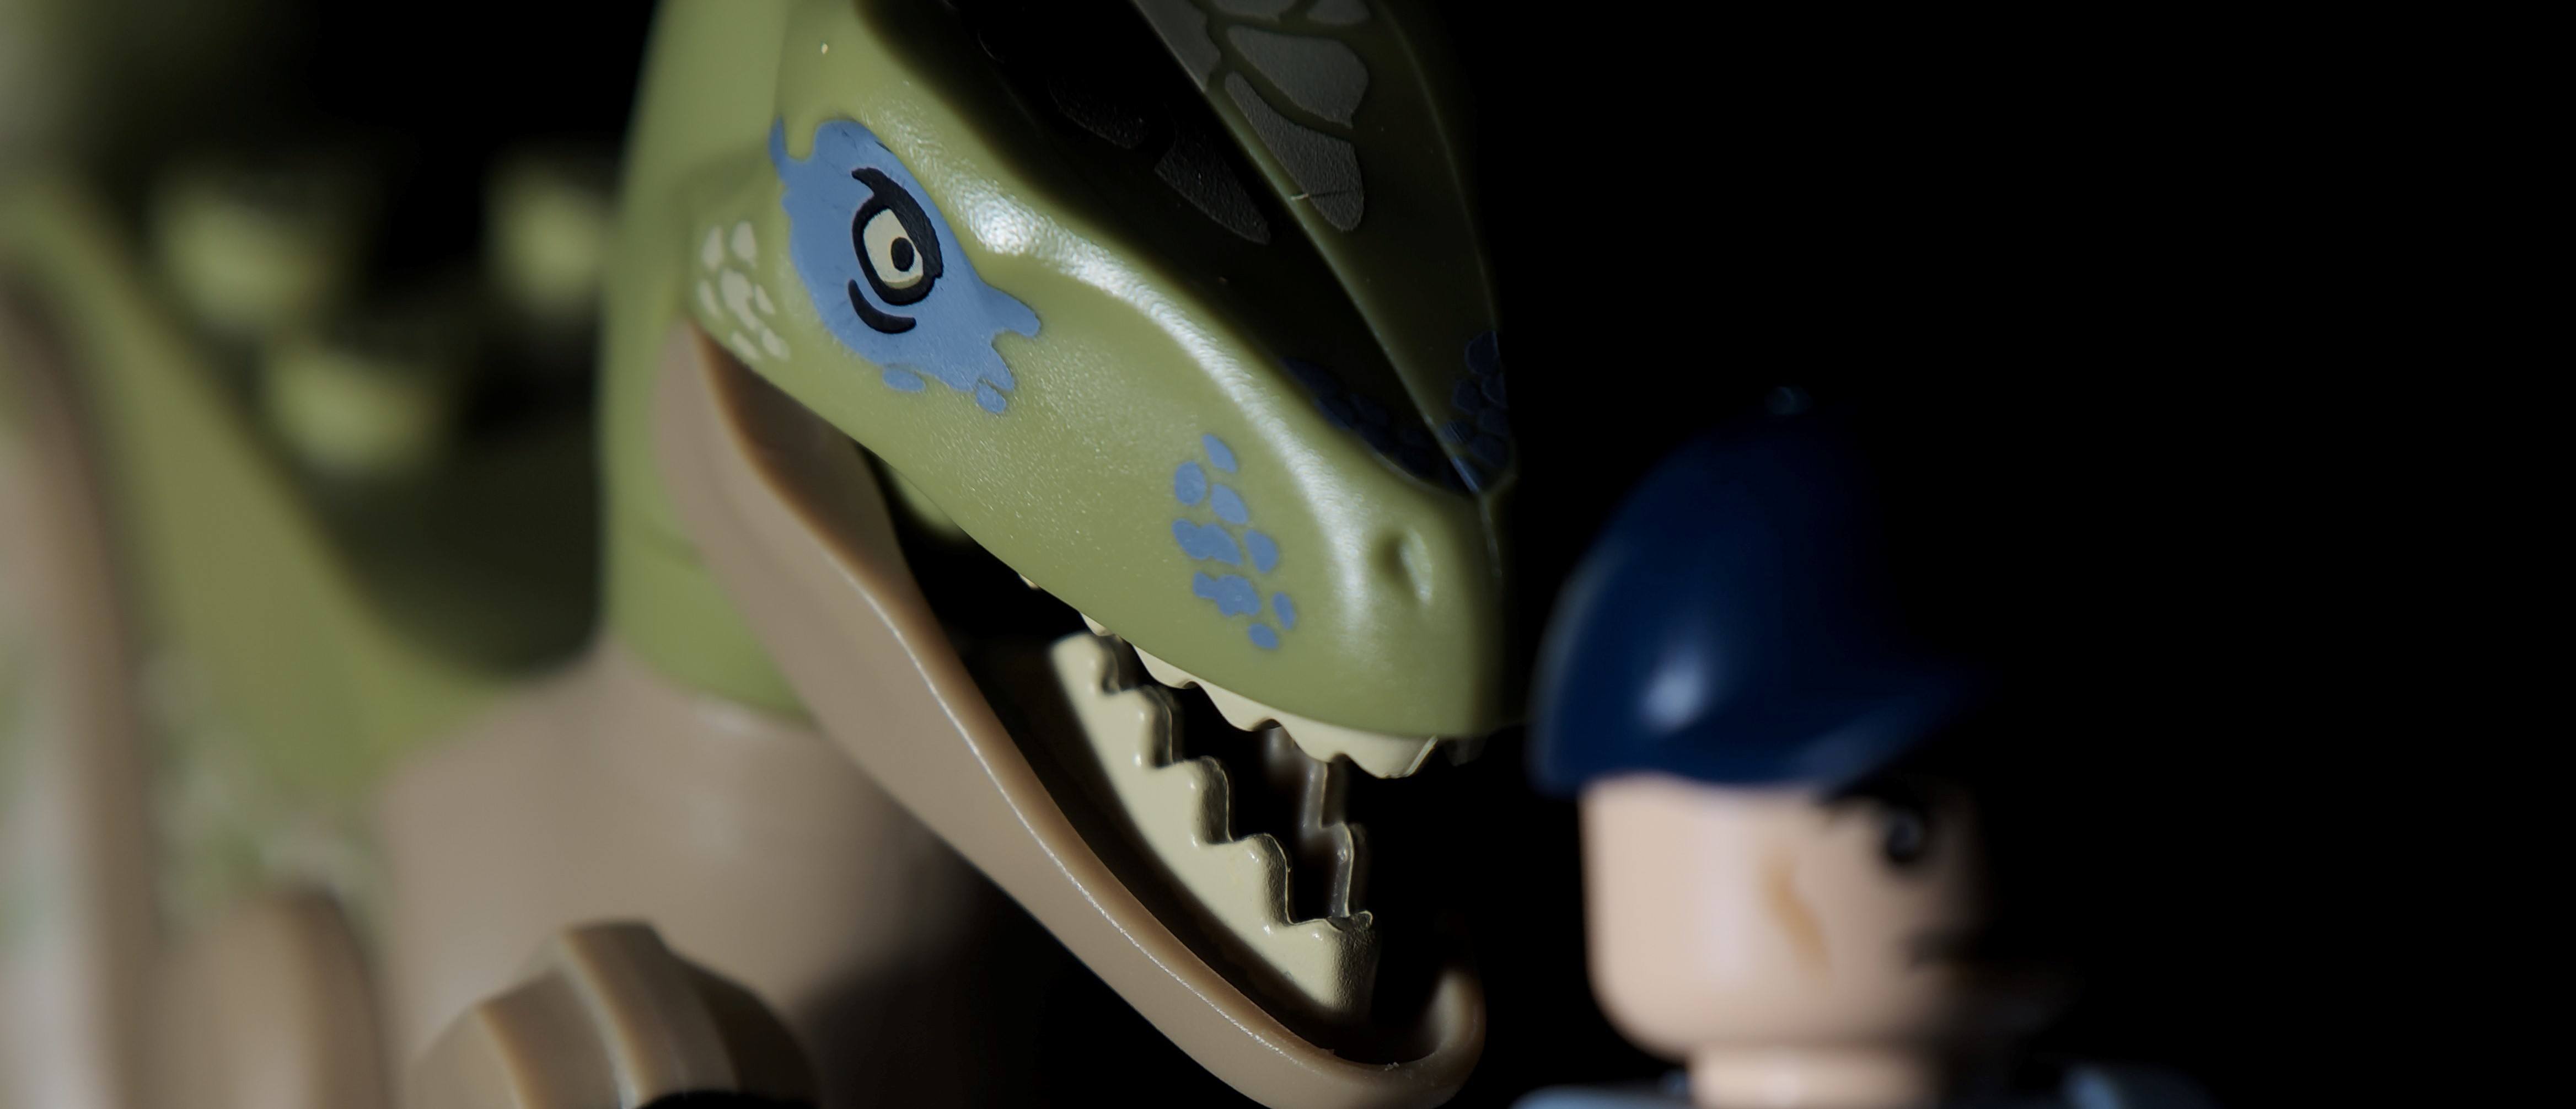 This poor lego is about to be eaten by a raptor, but at least he'll provide some protein.